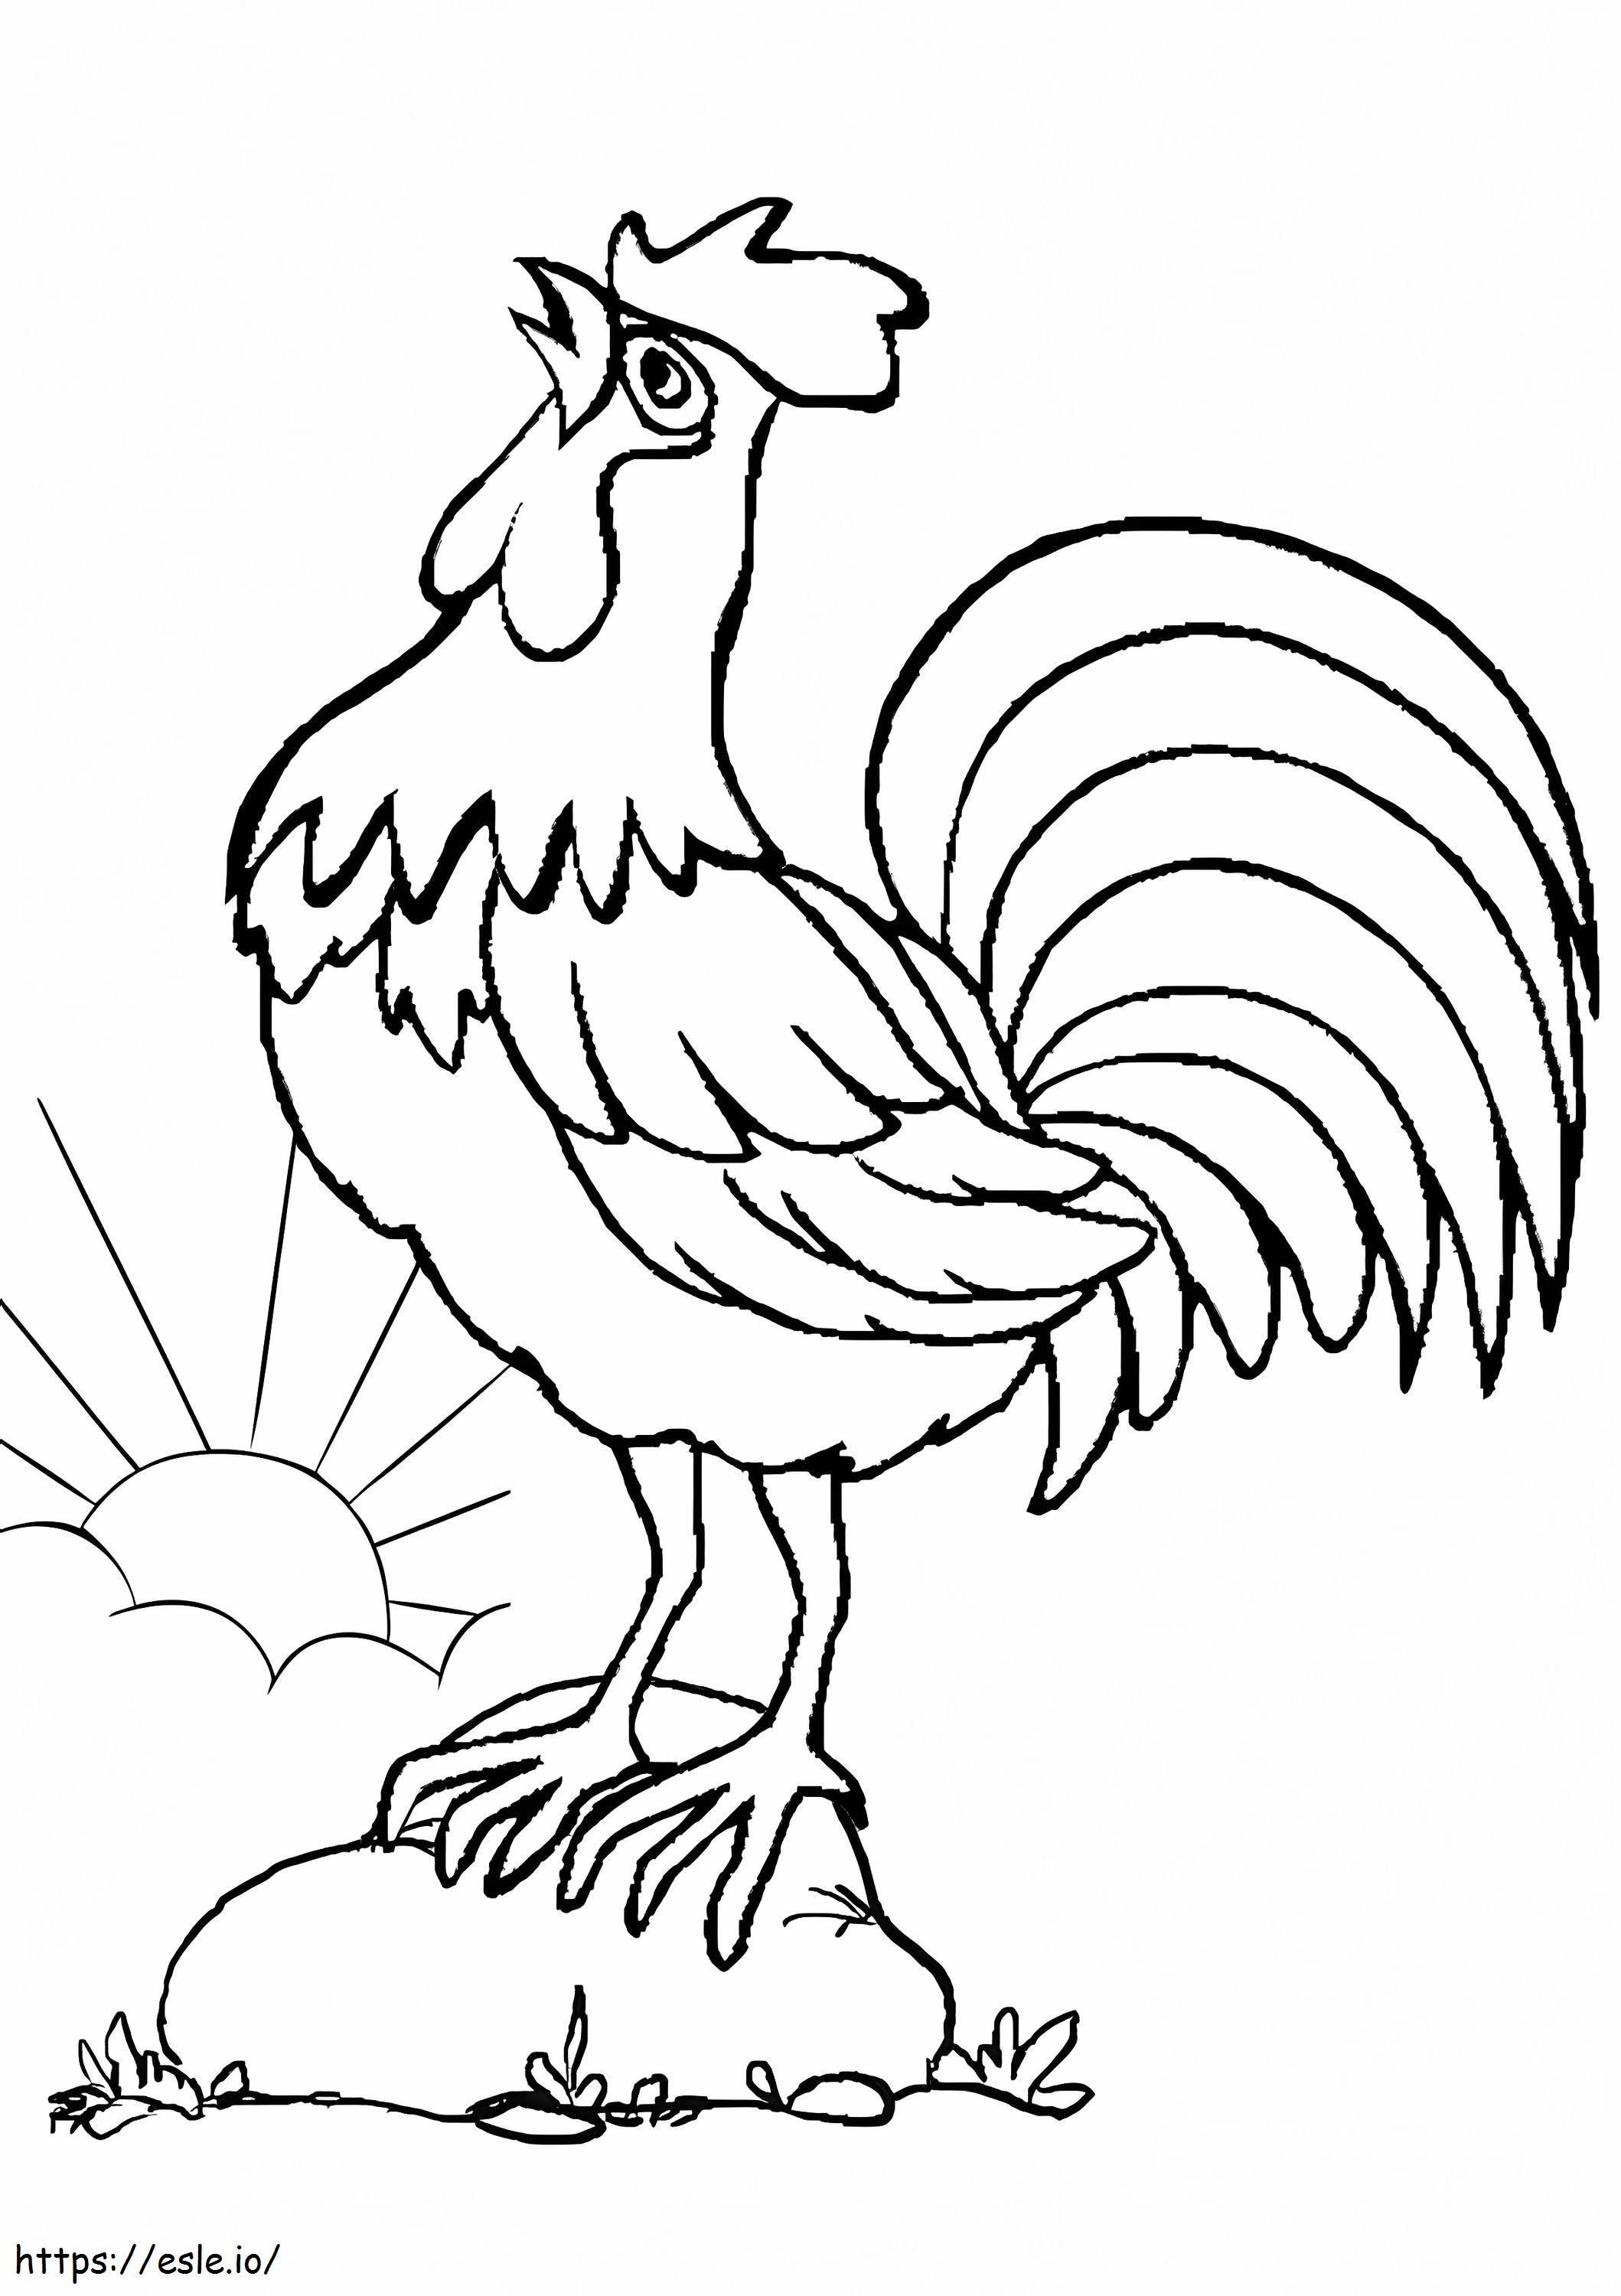 Rooster Crowing coloring page